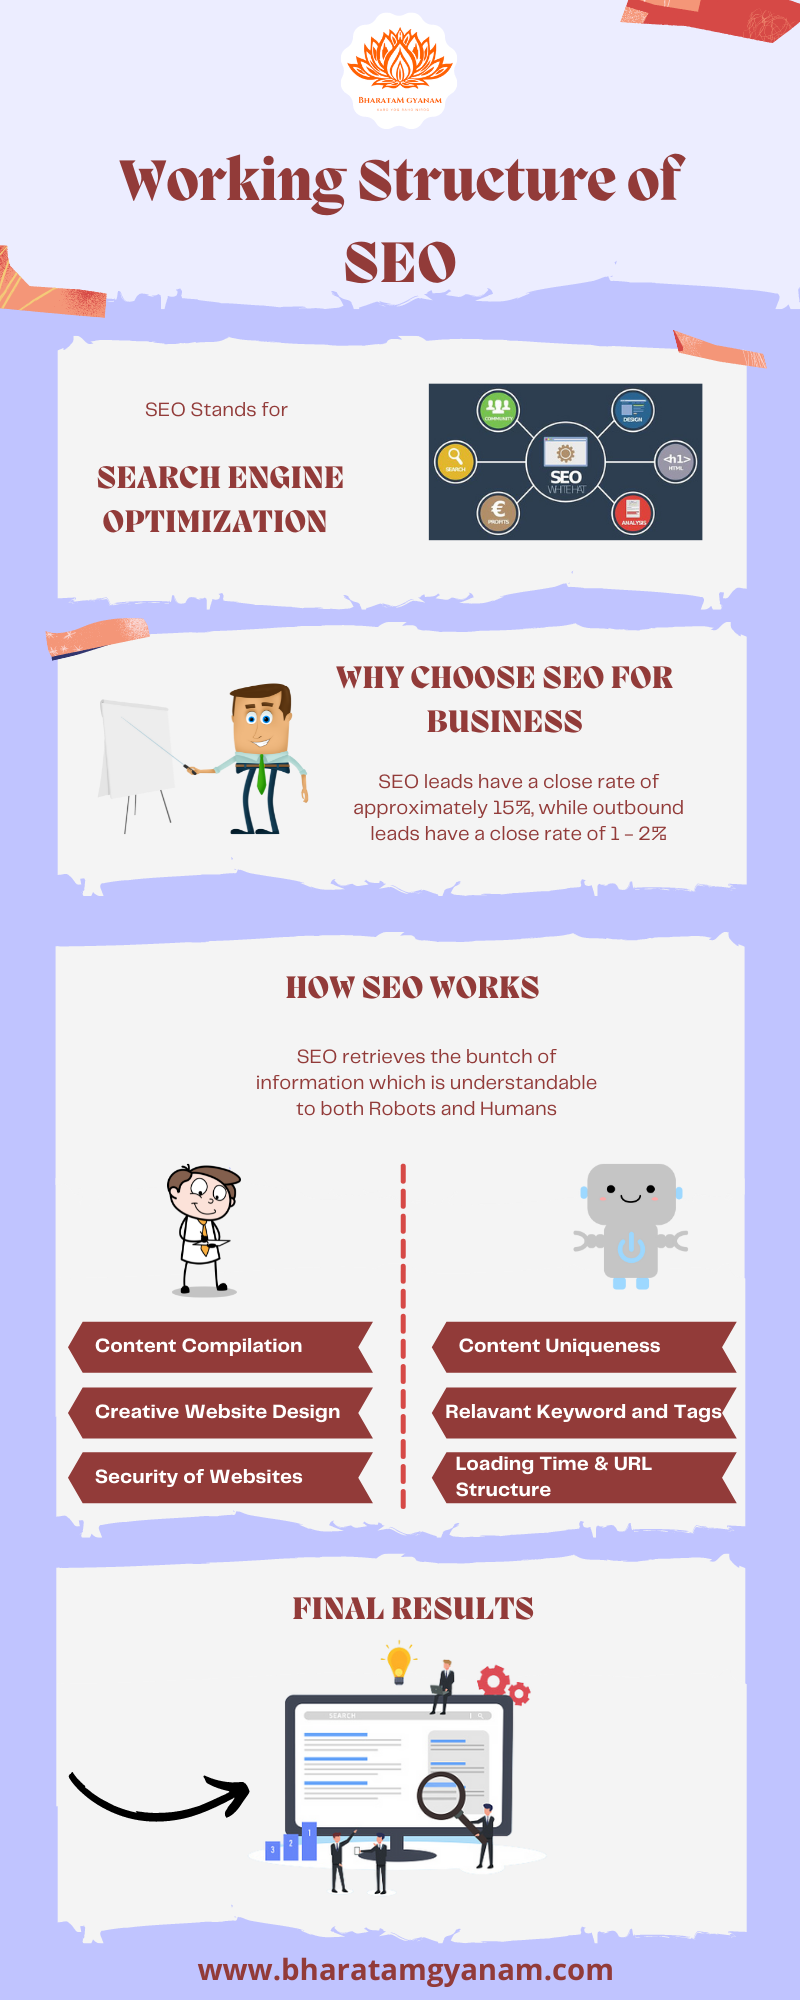 What is SEO (Search Engine Optimization) and How Does It Work?